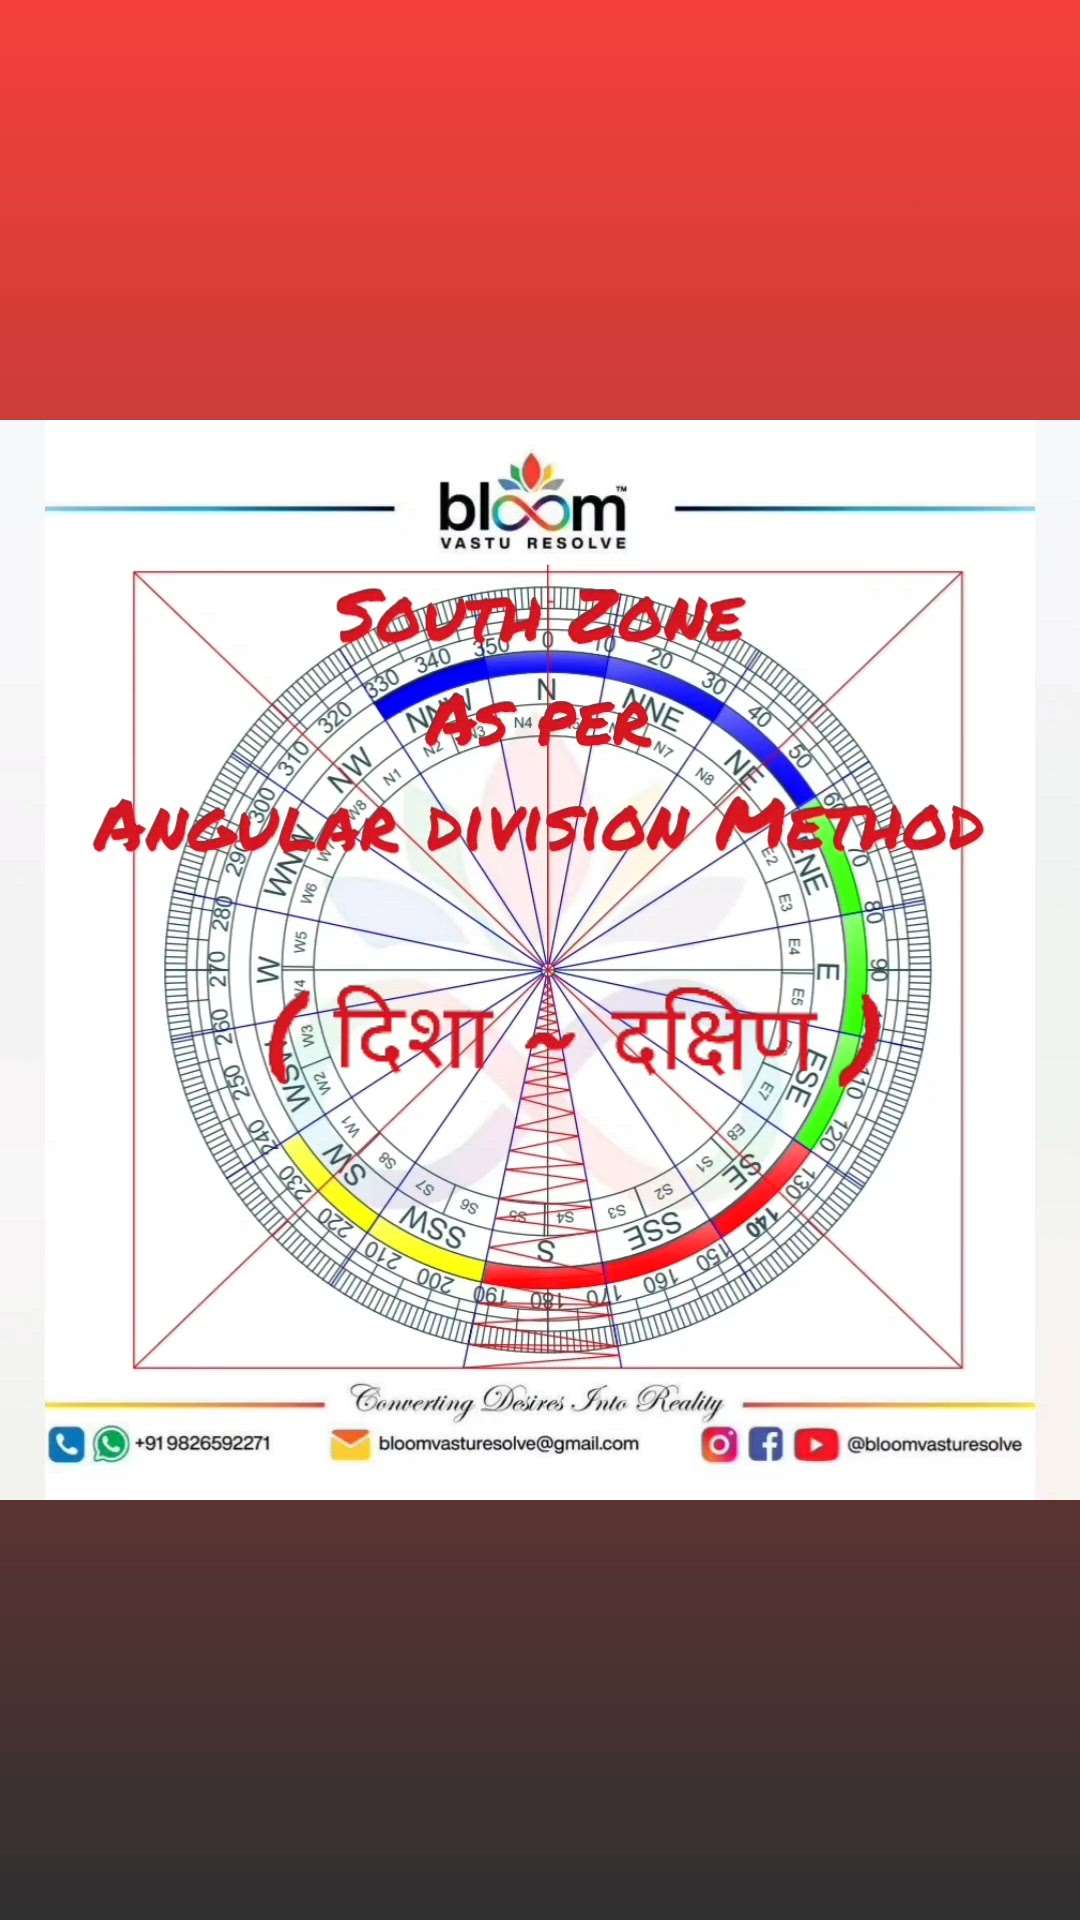 Your queries and comments are always welcome.
For more Vastu please follow @bloomvasturesolve
on YouTube, Instagram & Facebook
.
.
For personal consultation, feel free to contact certified MahaVastu Expert through
M - 9826592271
Or
bloomvasturesolve@gmail.com

#vastu 
#mahavastu #mahavastuexpert
#bloomvasturesolve
#vastuforhome 
#vastuforbusiness 
#vastutips 
#southzone